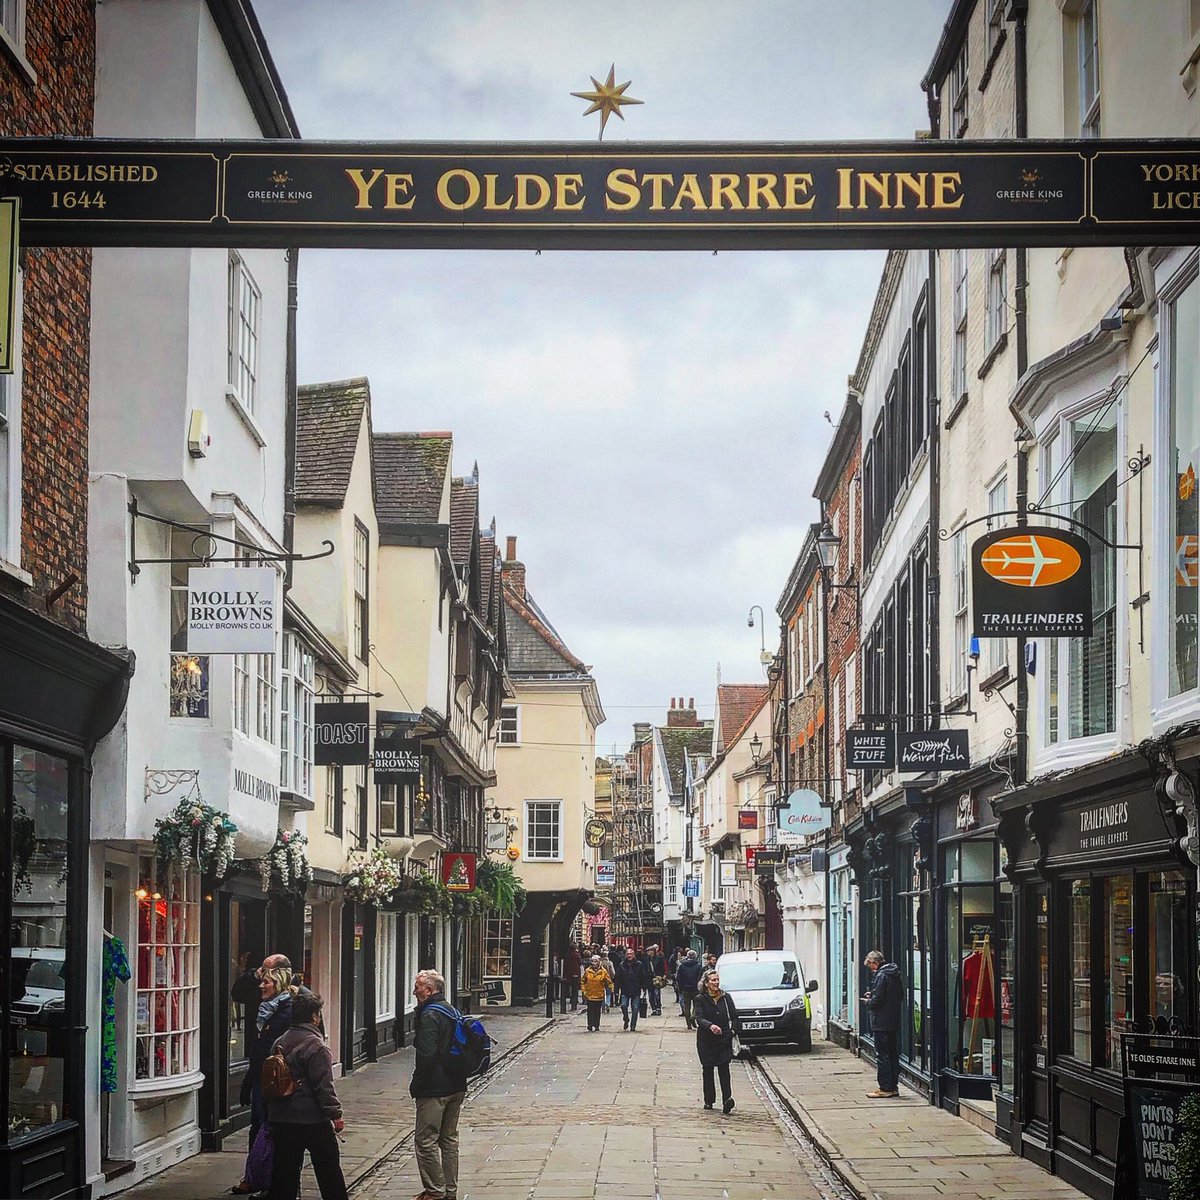 When #sightseeing in #York, always remember this one cardinal rule: look up 👀 

Learn all about York’s oldest - and unusual - advert on our #tour 

Late Afternoon. Every day. 

🎟 Bookings DM or email 90minuteyork@gmail.com

#thingstodoinyork #visityork #loveyork #loveyorkshire